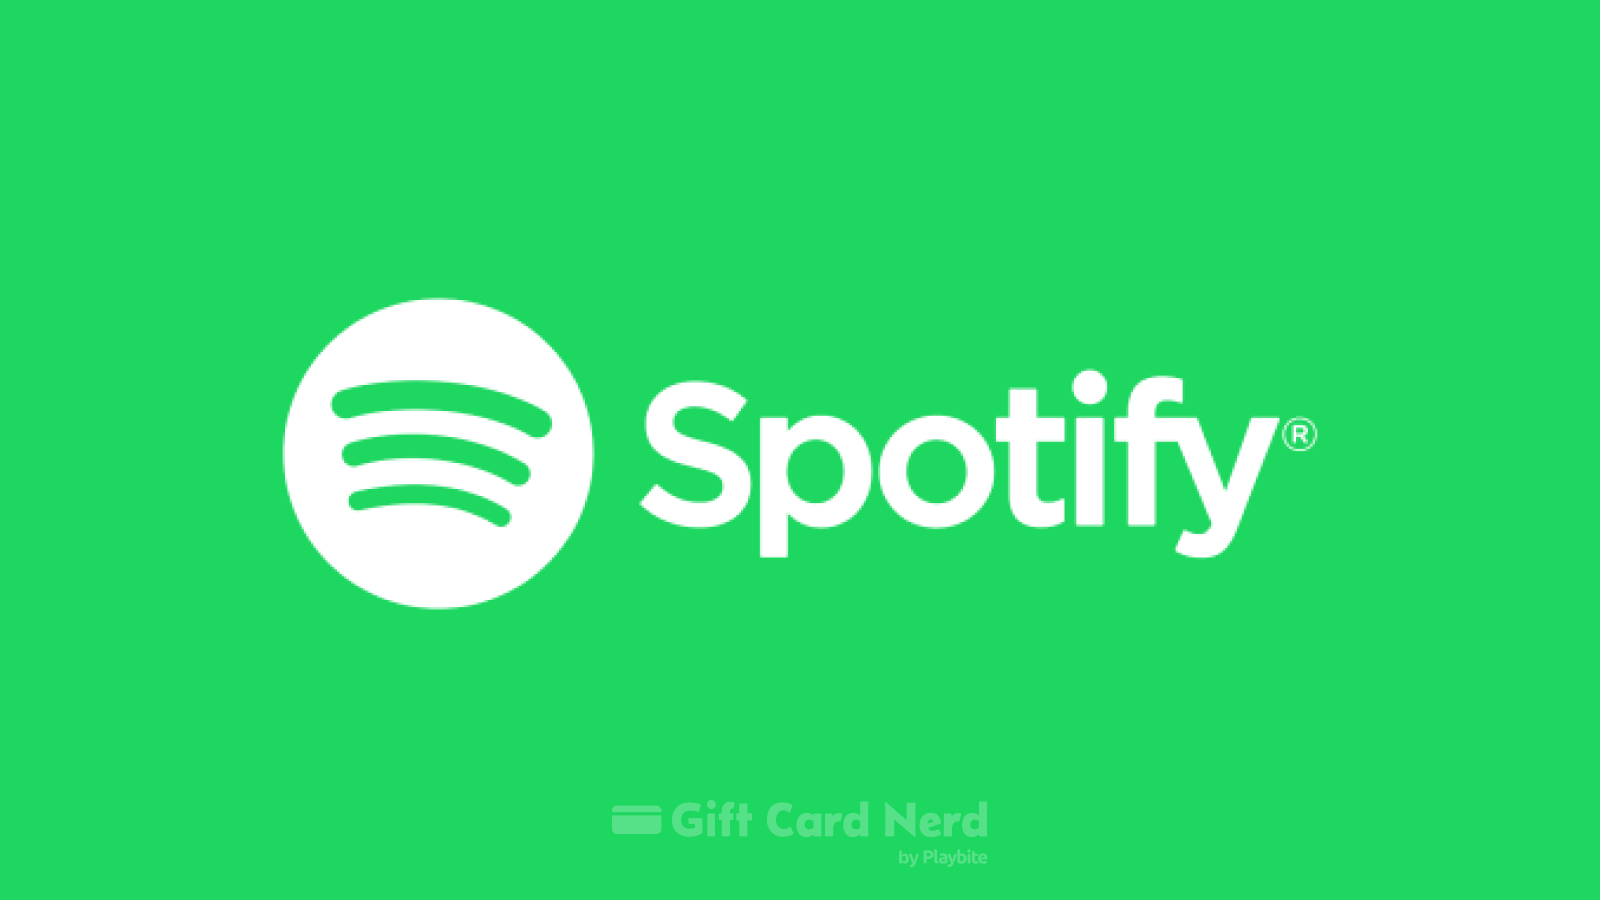 Where to Buy Spotify Gift Cards: CVS Edition